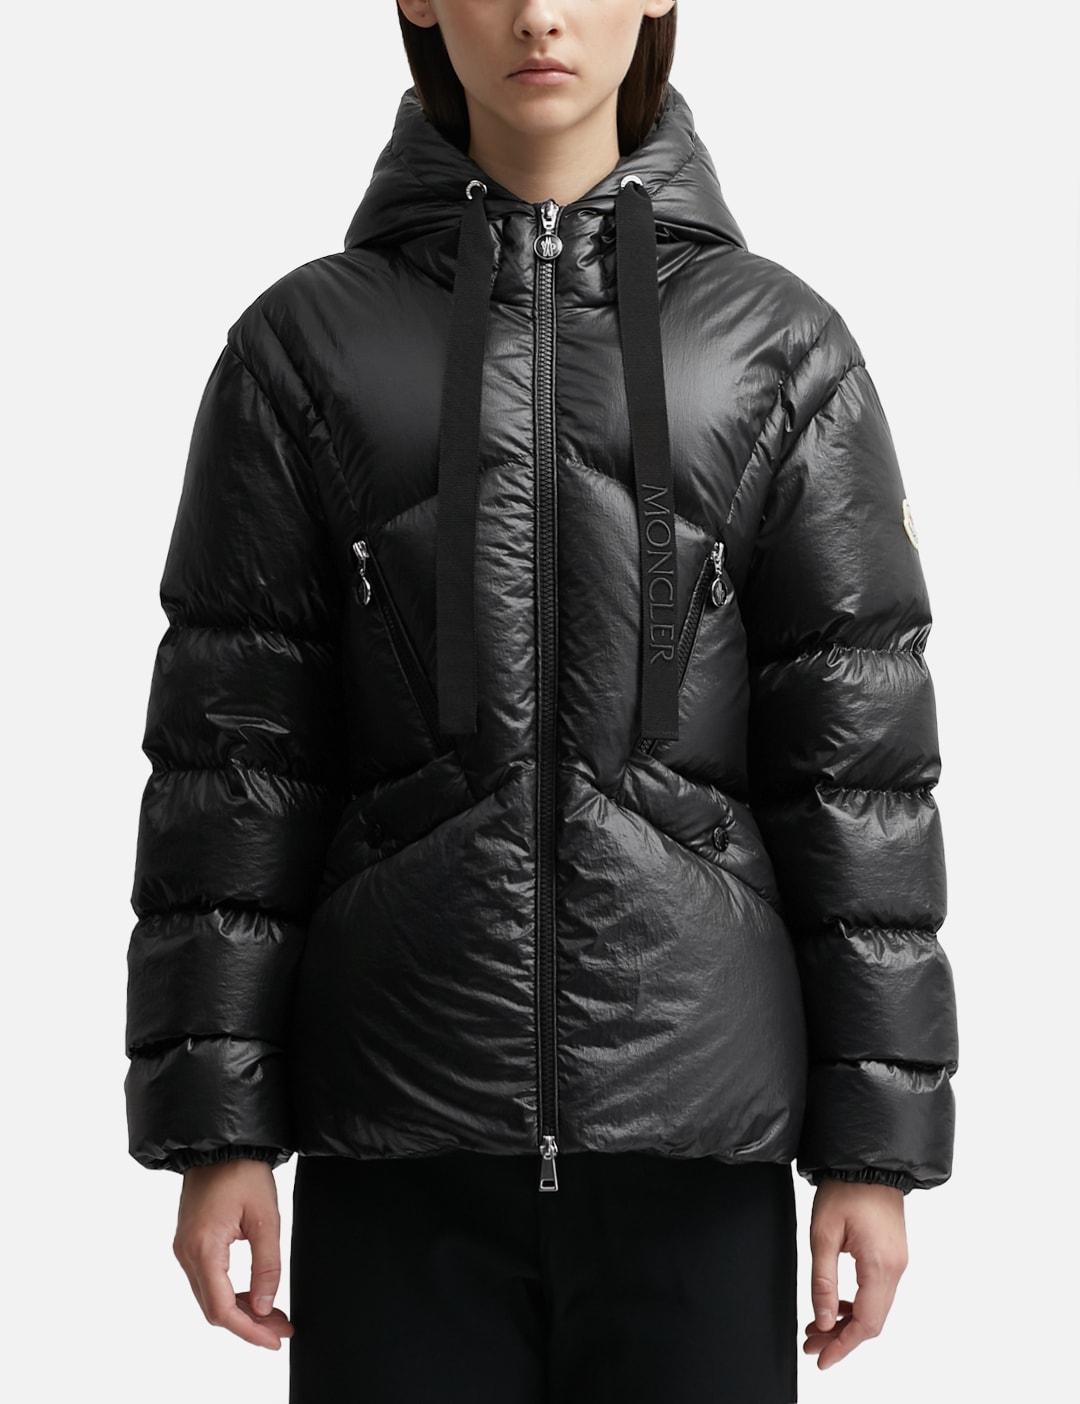 Moncler - Seine Short Down Jacket | HBX - Globally Curated Fashion and ...